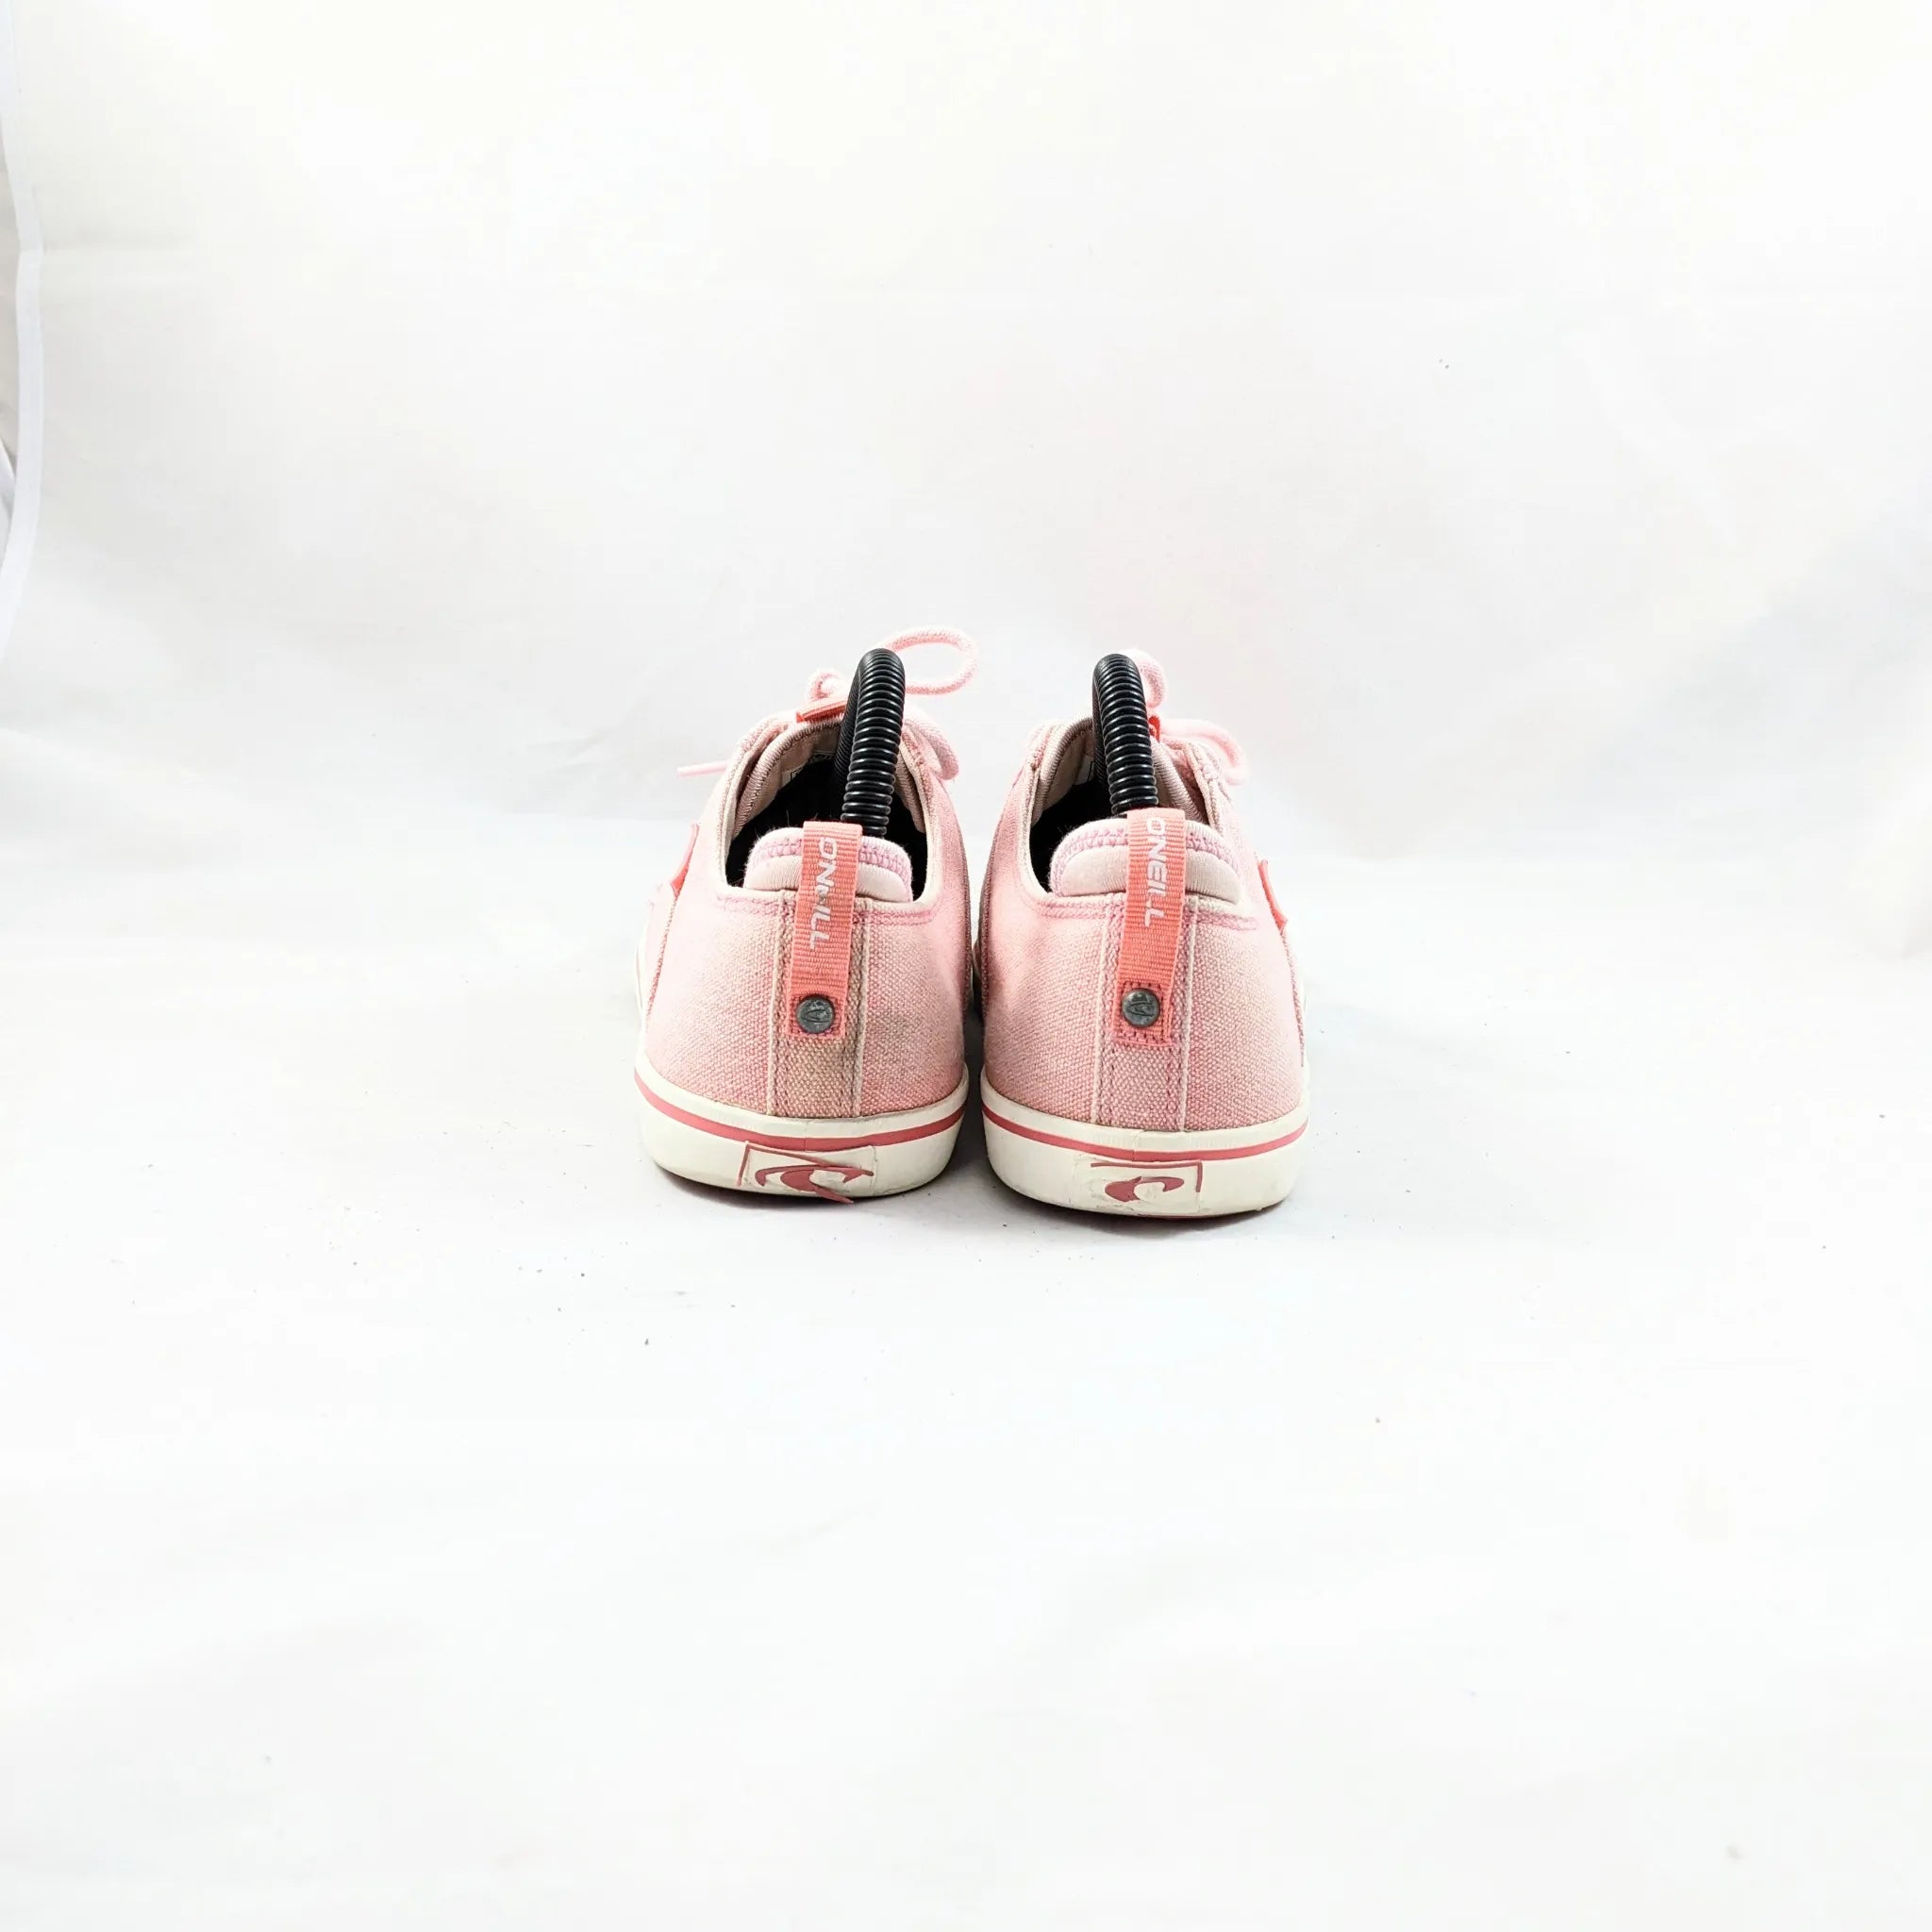 O'Neil Pink Sneakers